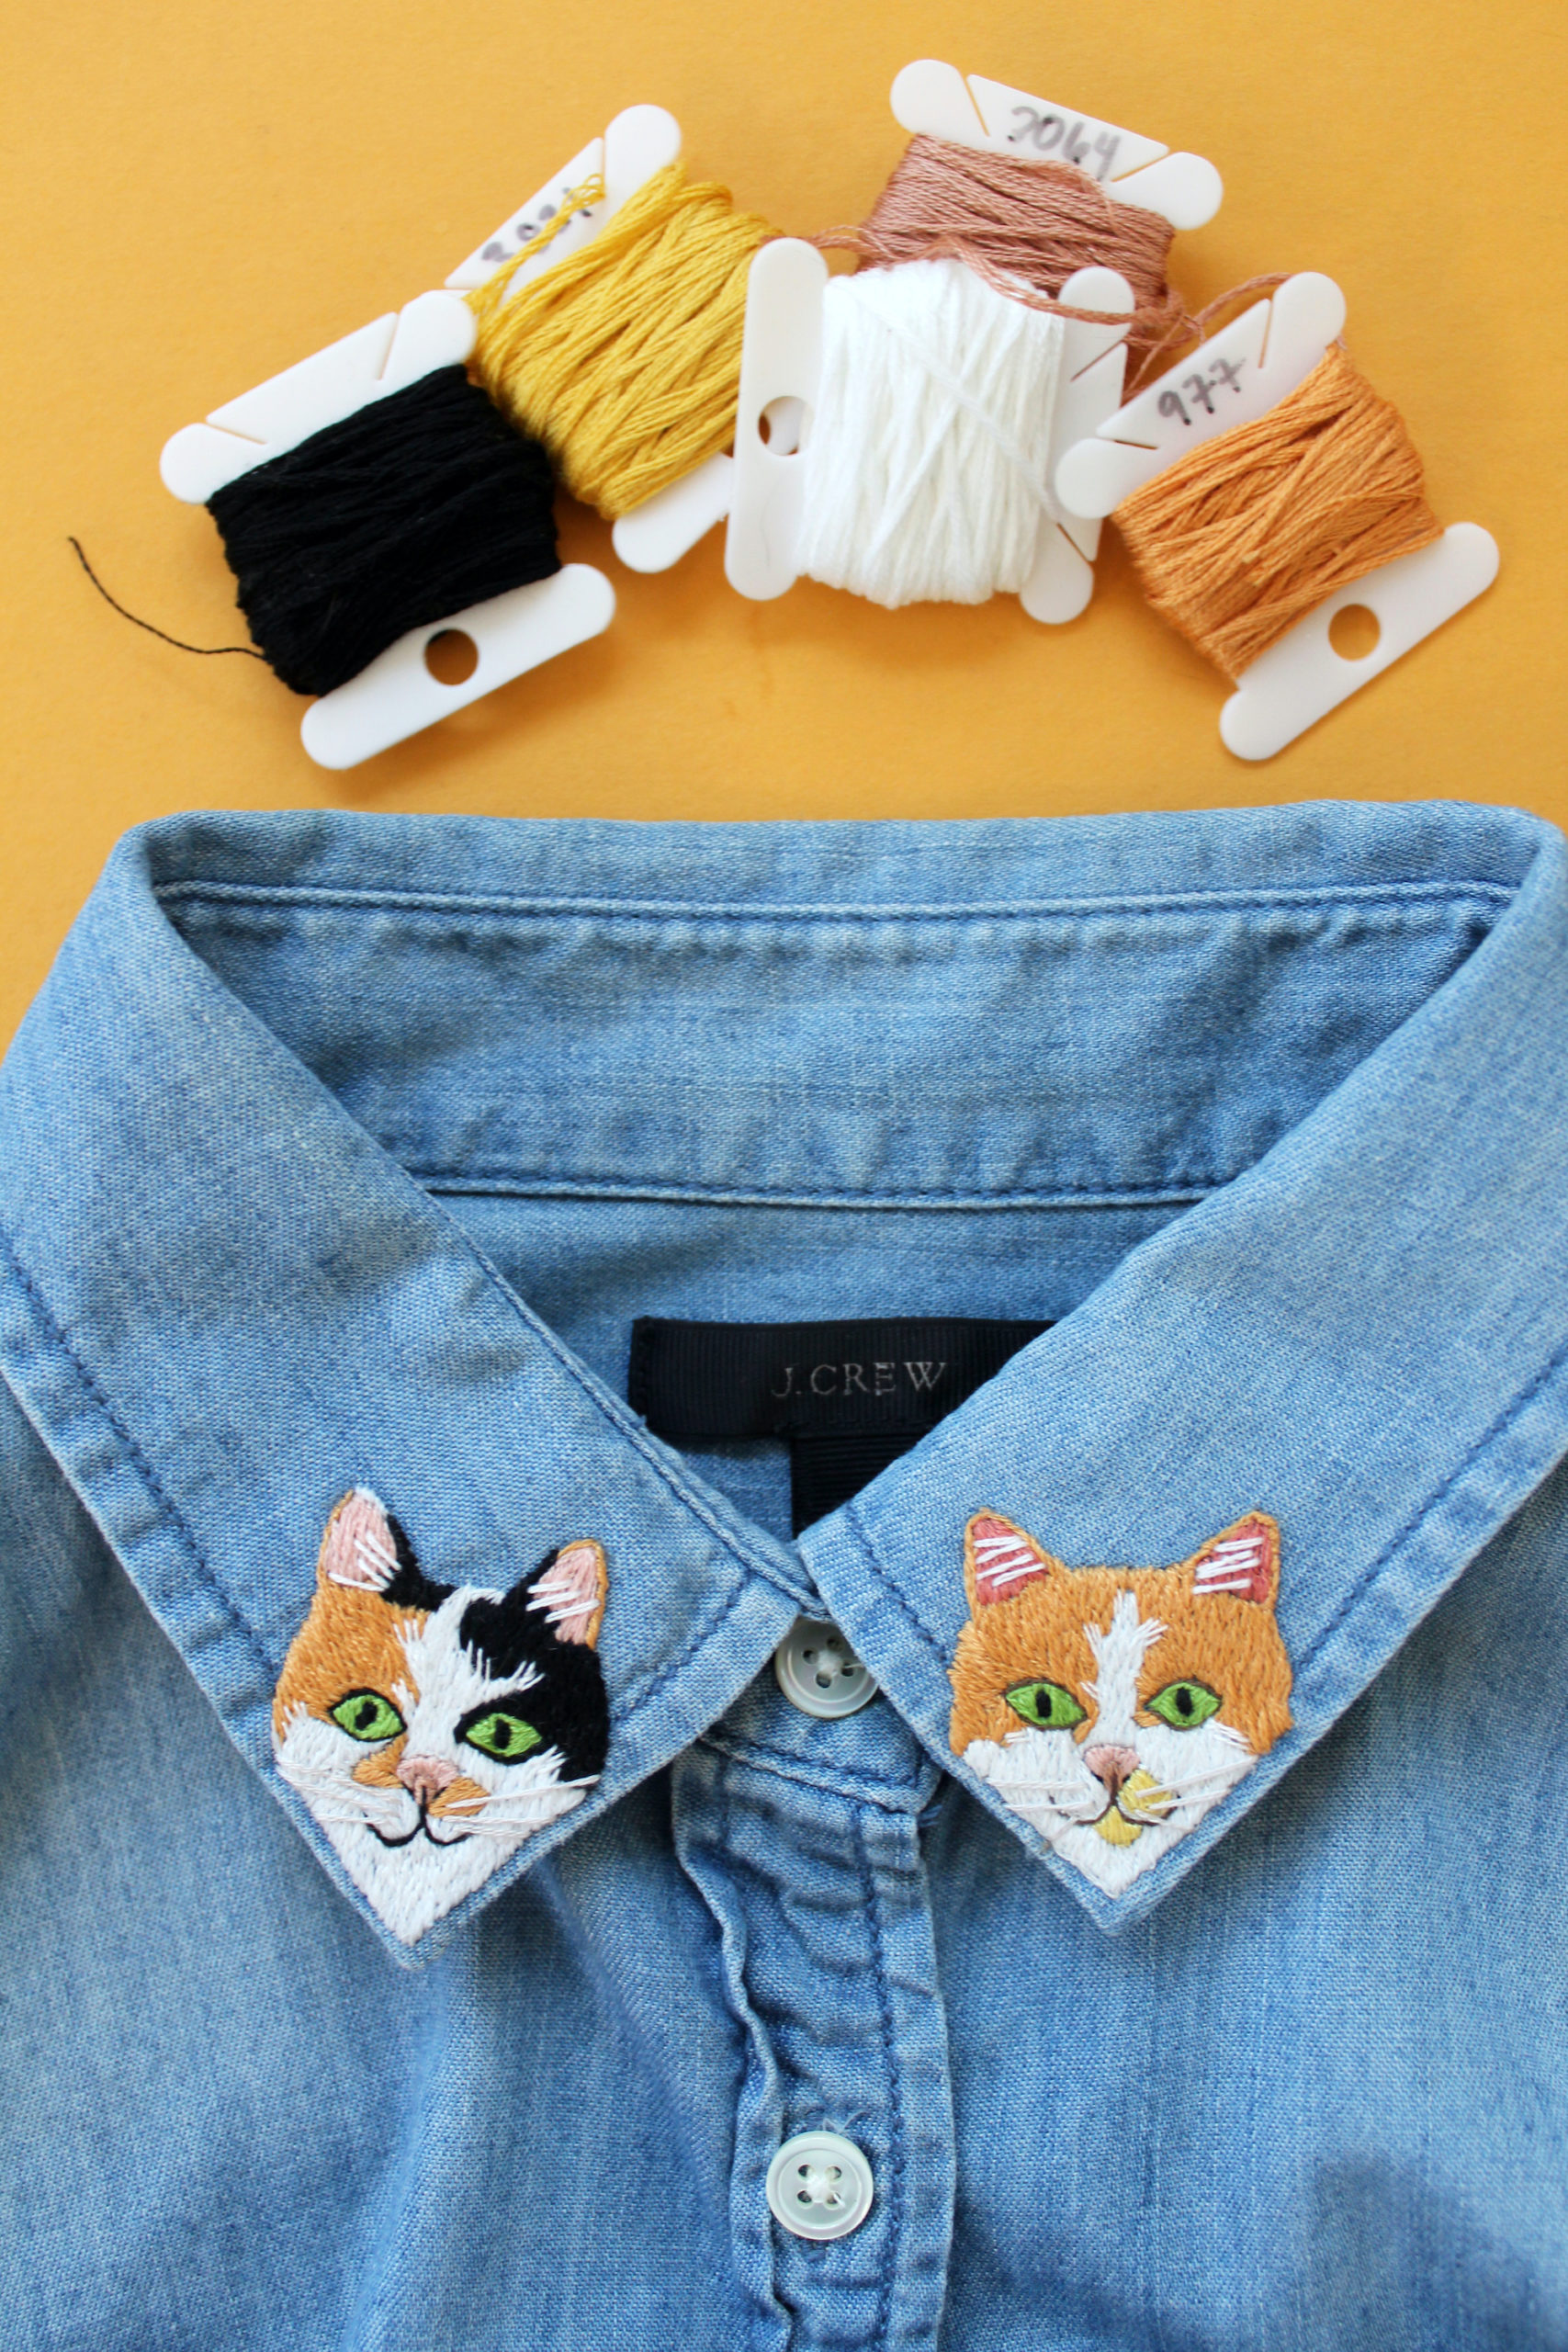 Stitch Kitties on Your Favorite Shirt With My New Embroidery